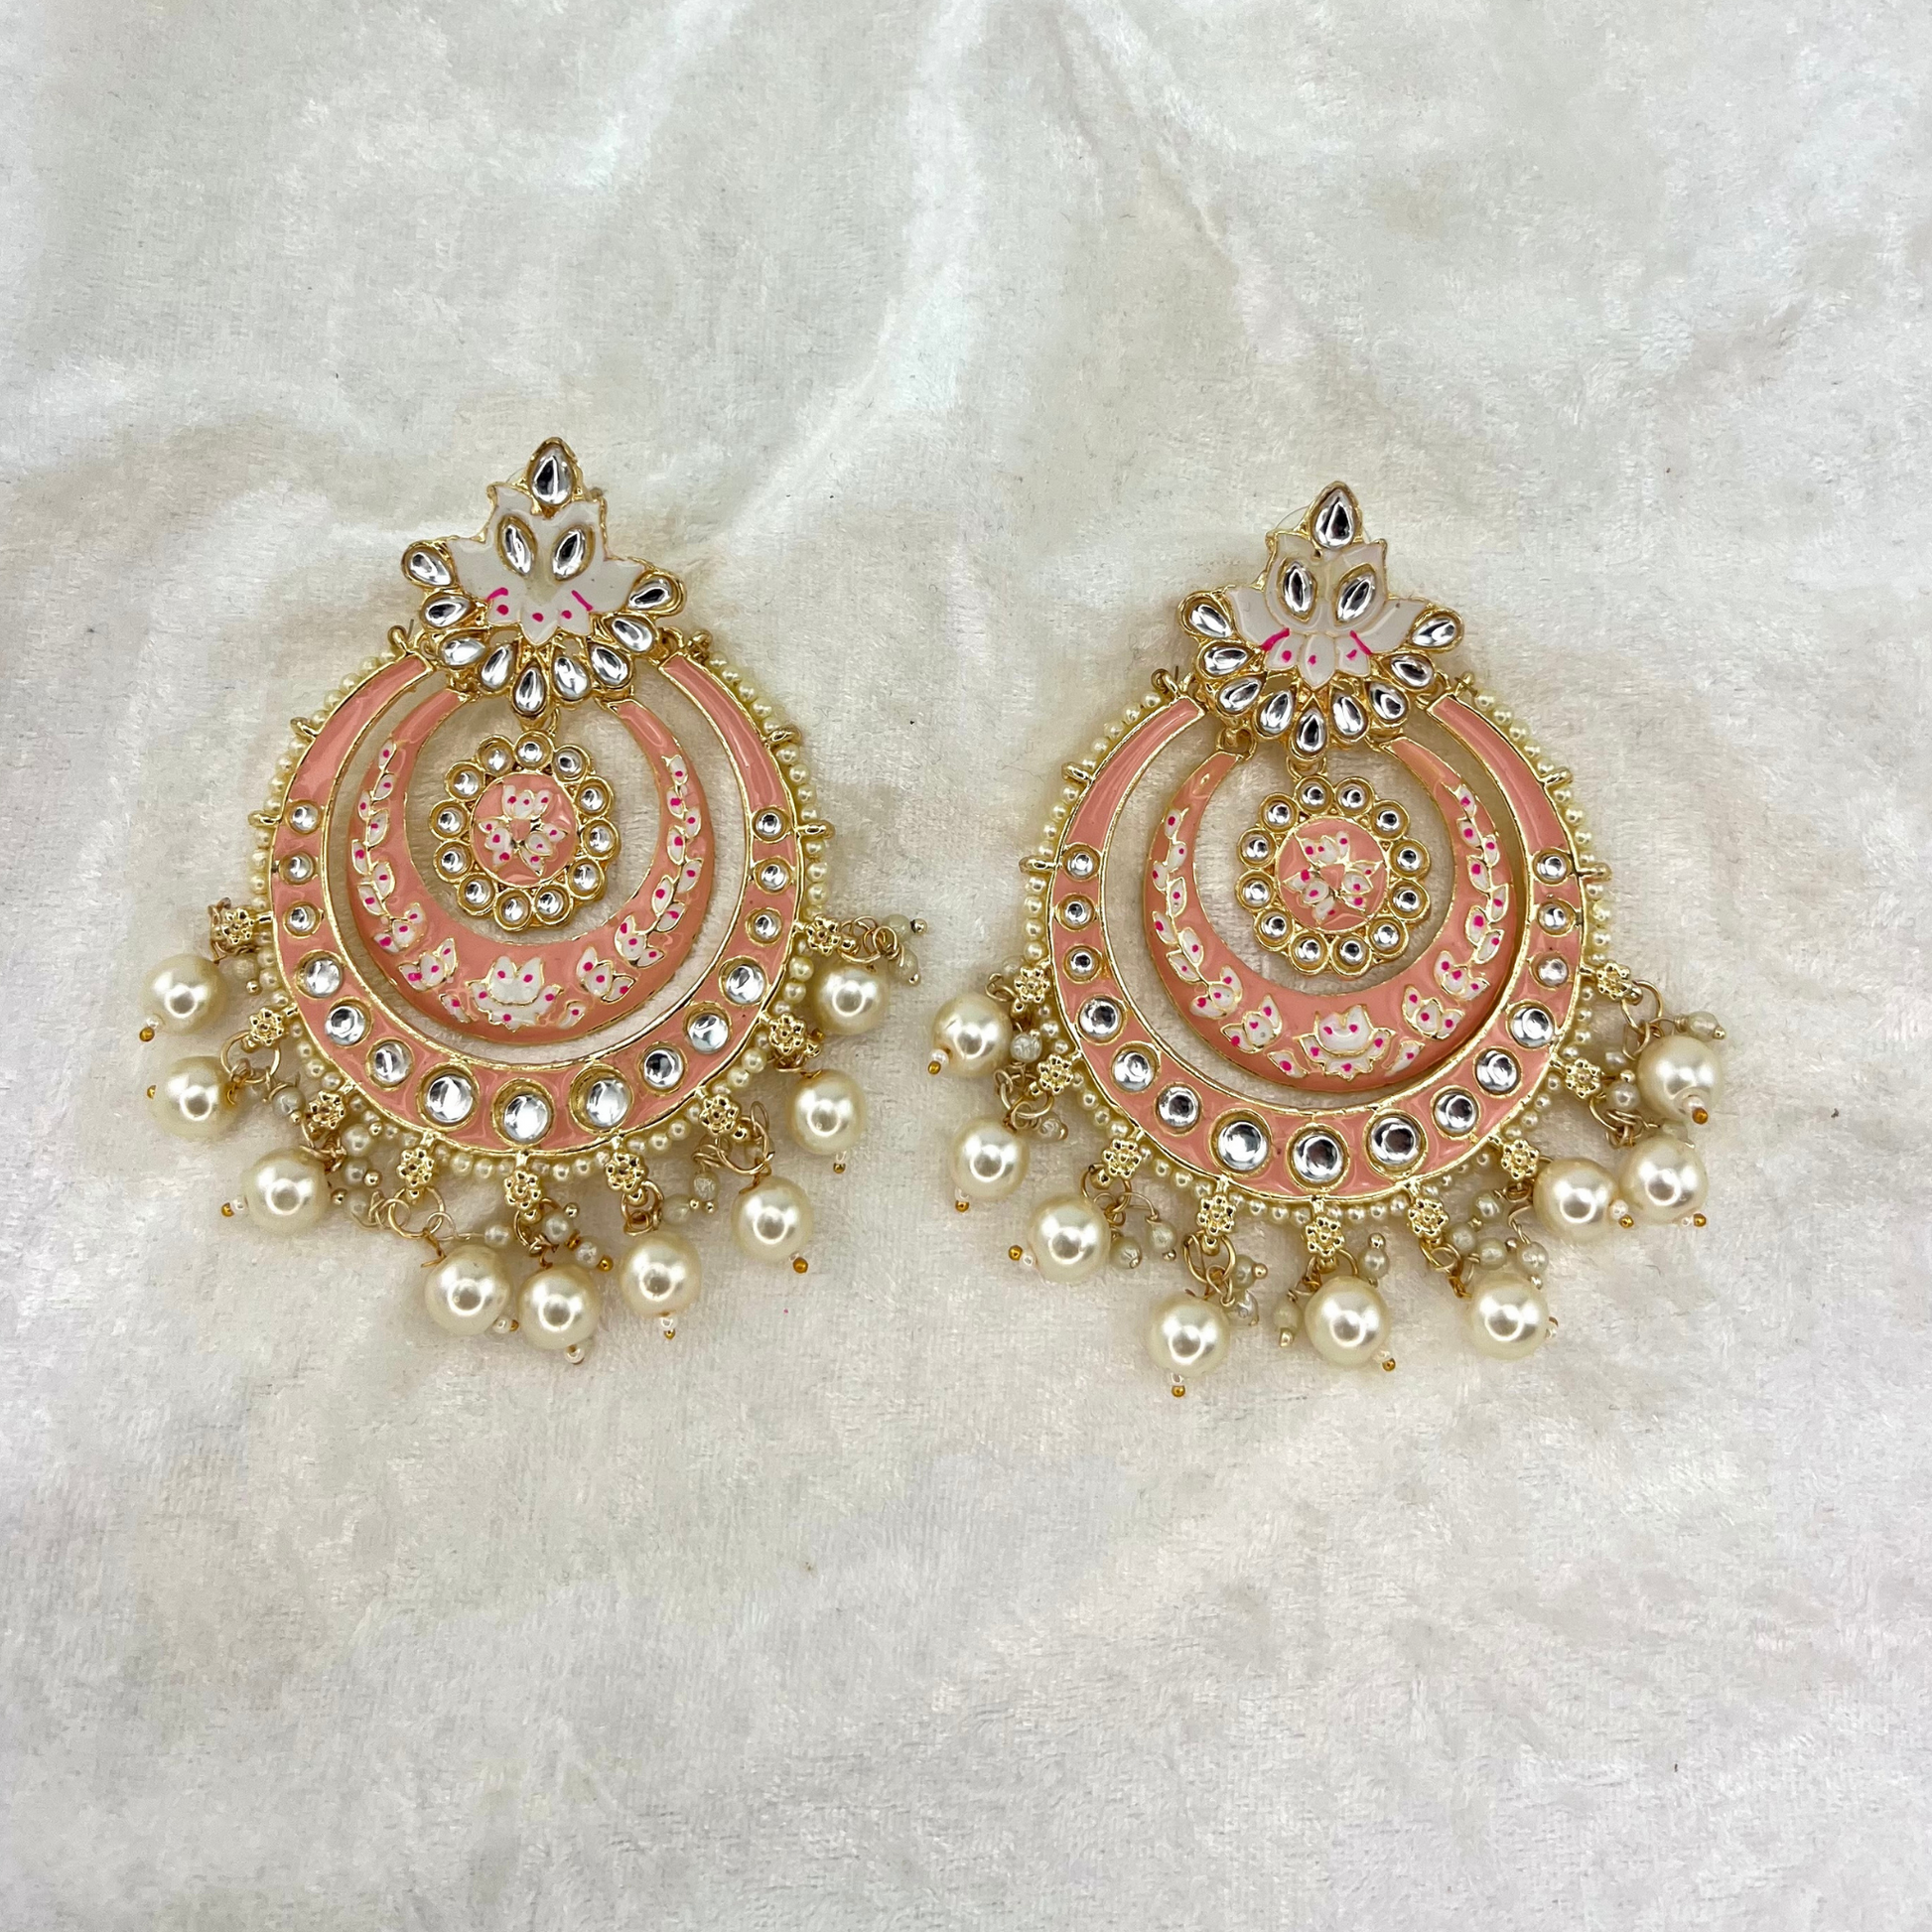 Large Indian Wedding Earrings in Baby Pink with pearls